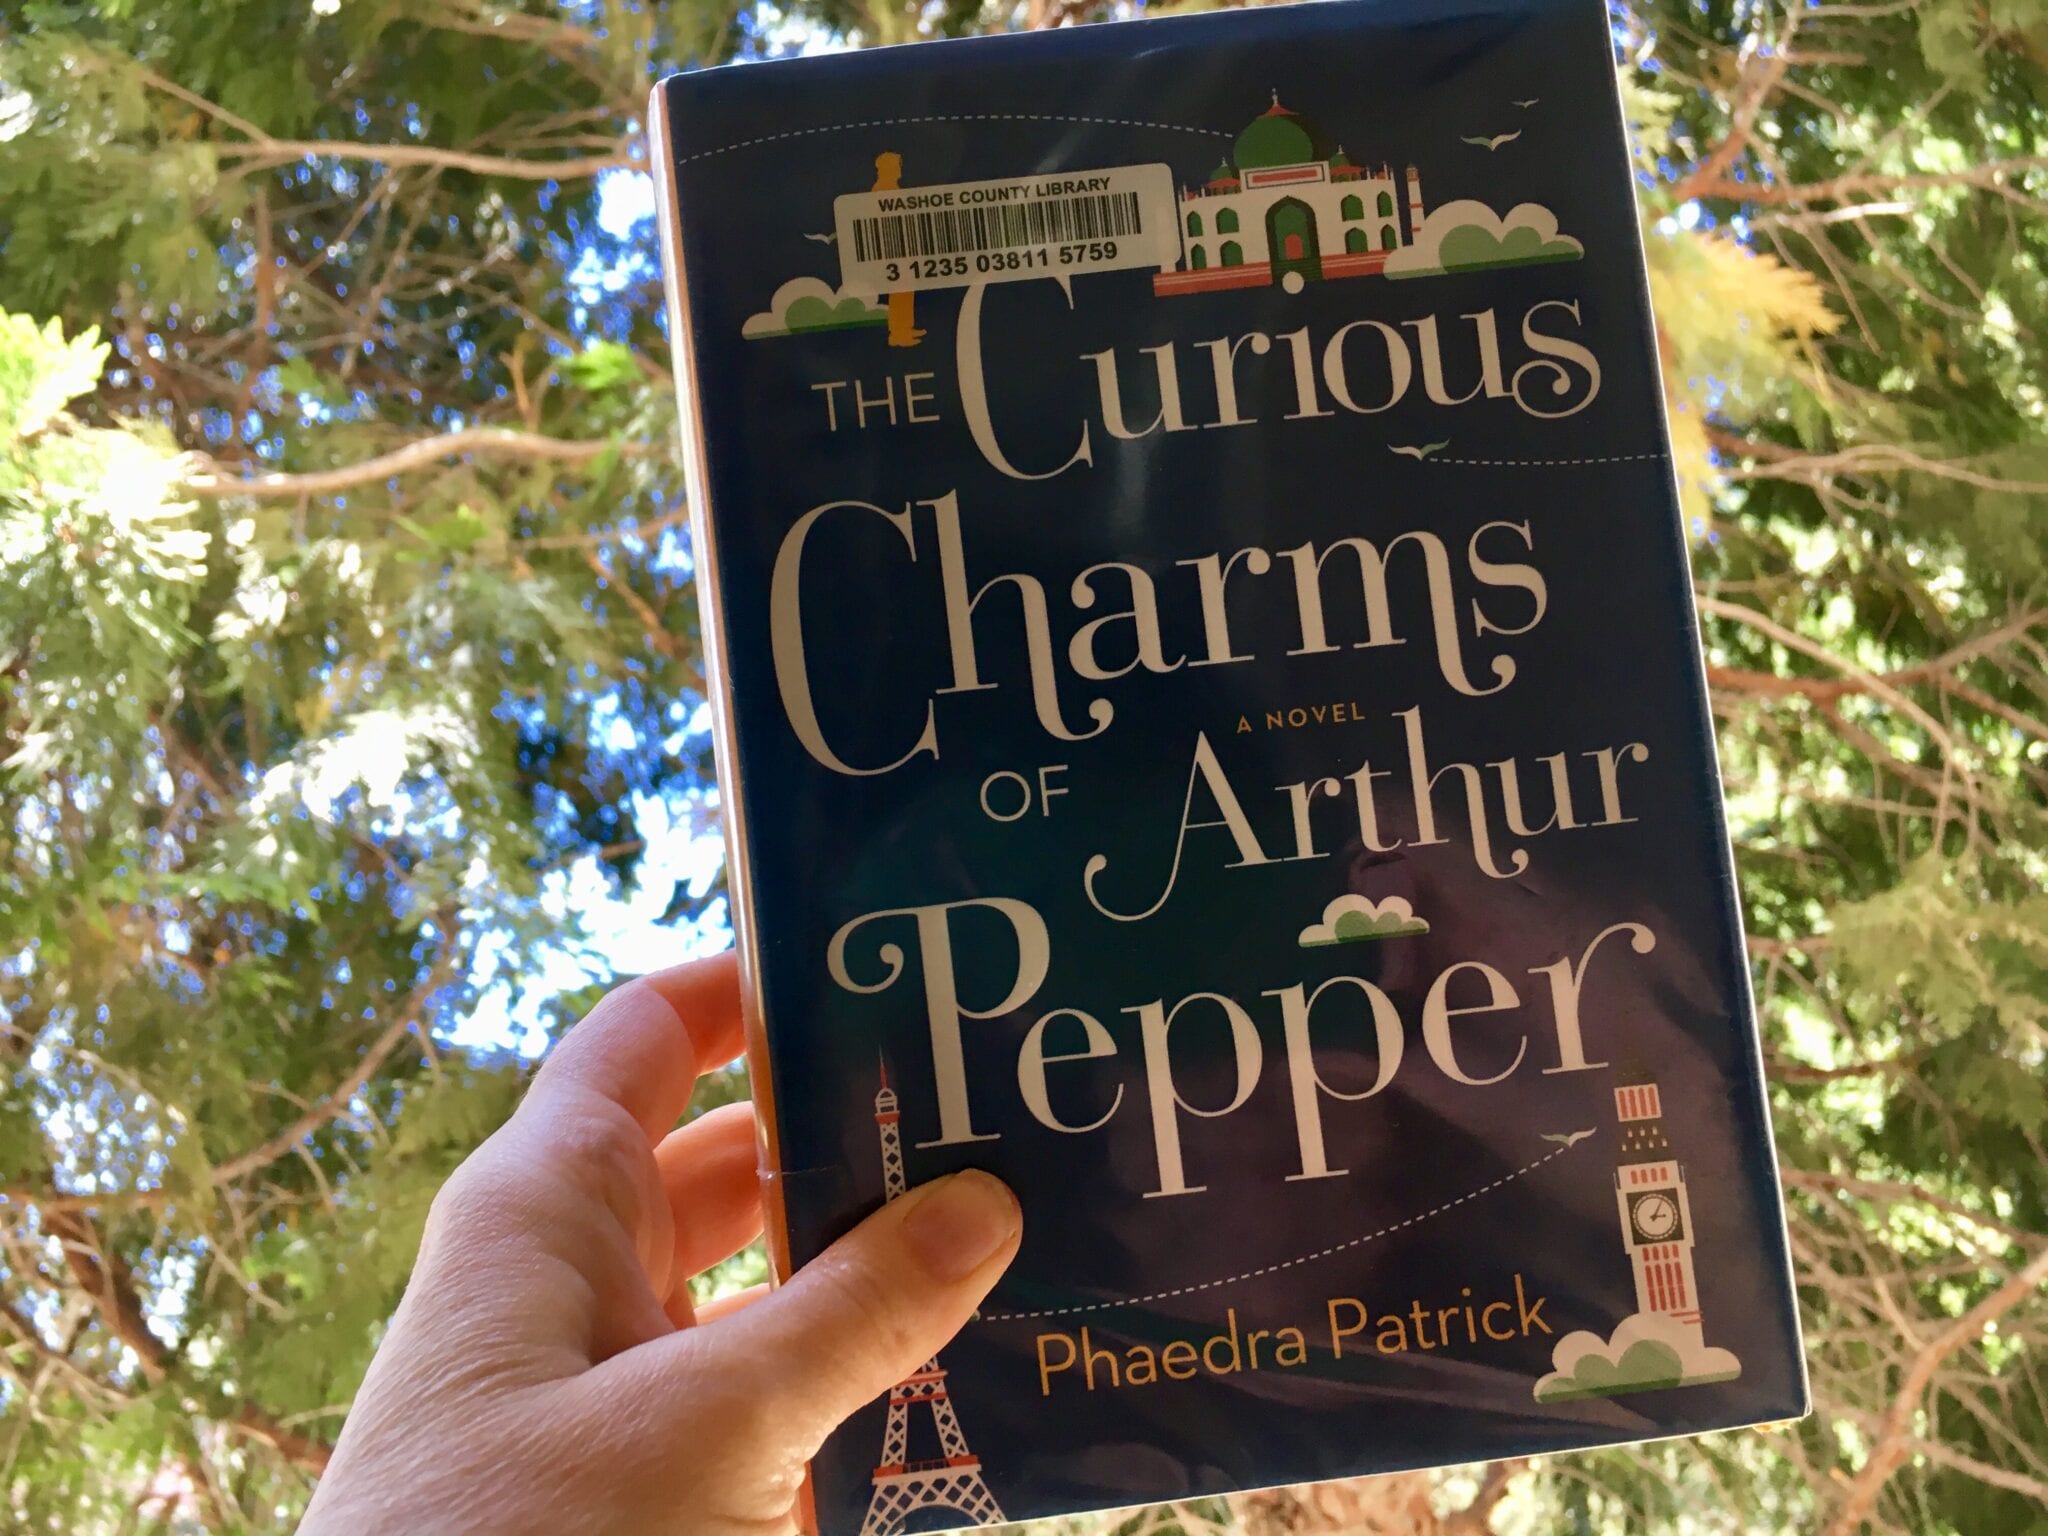 Book Musings: The Curious Charms of Arthur Pepper